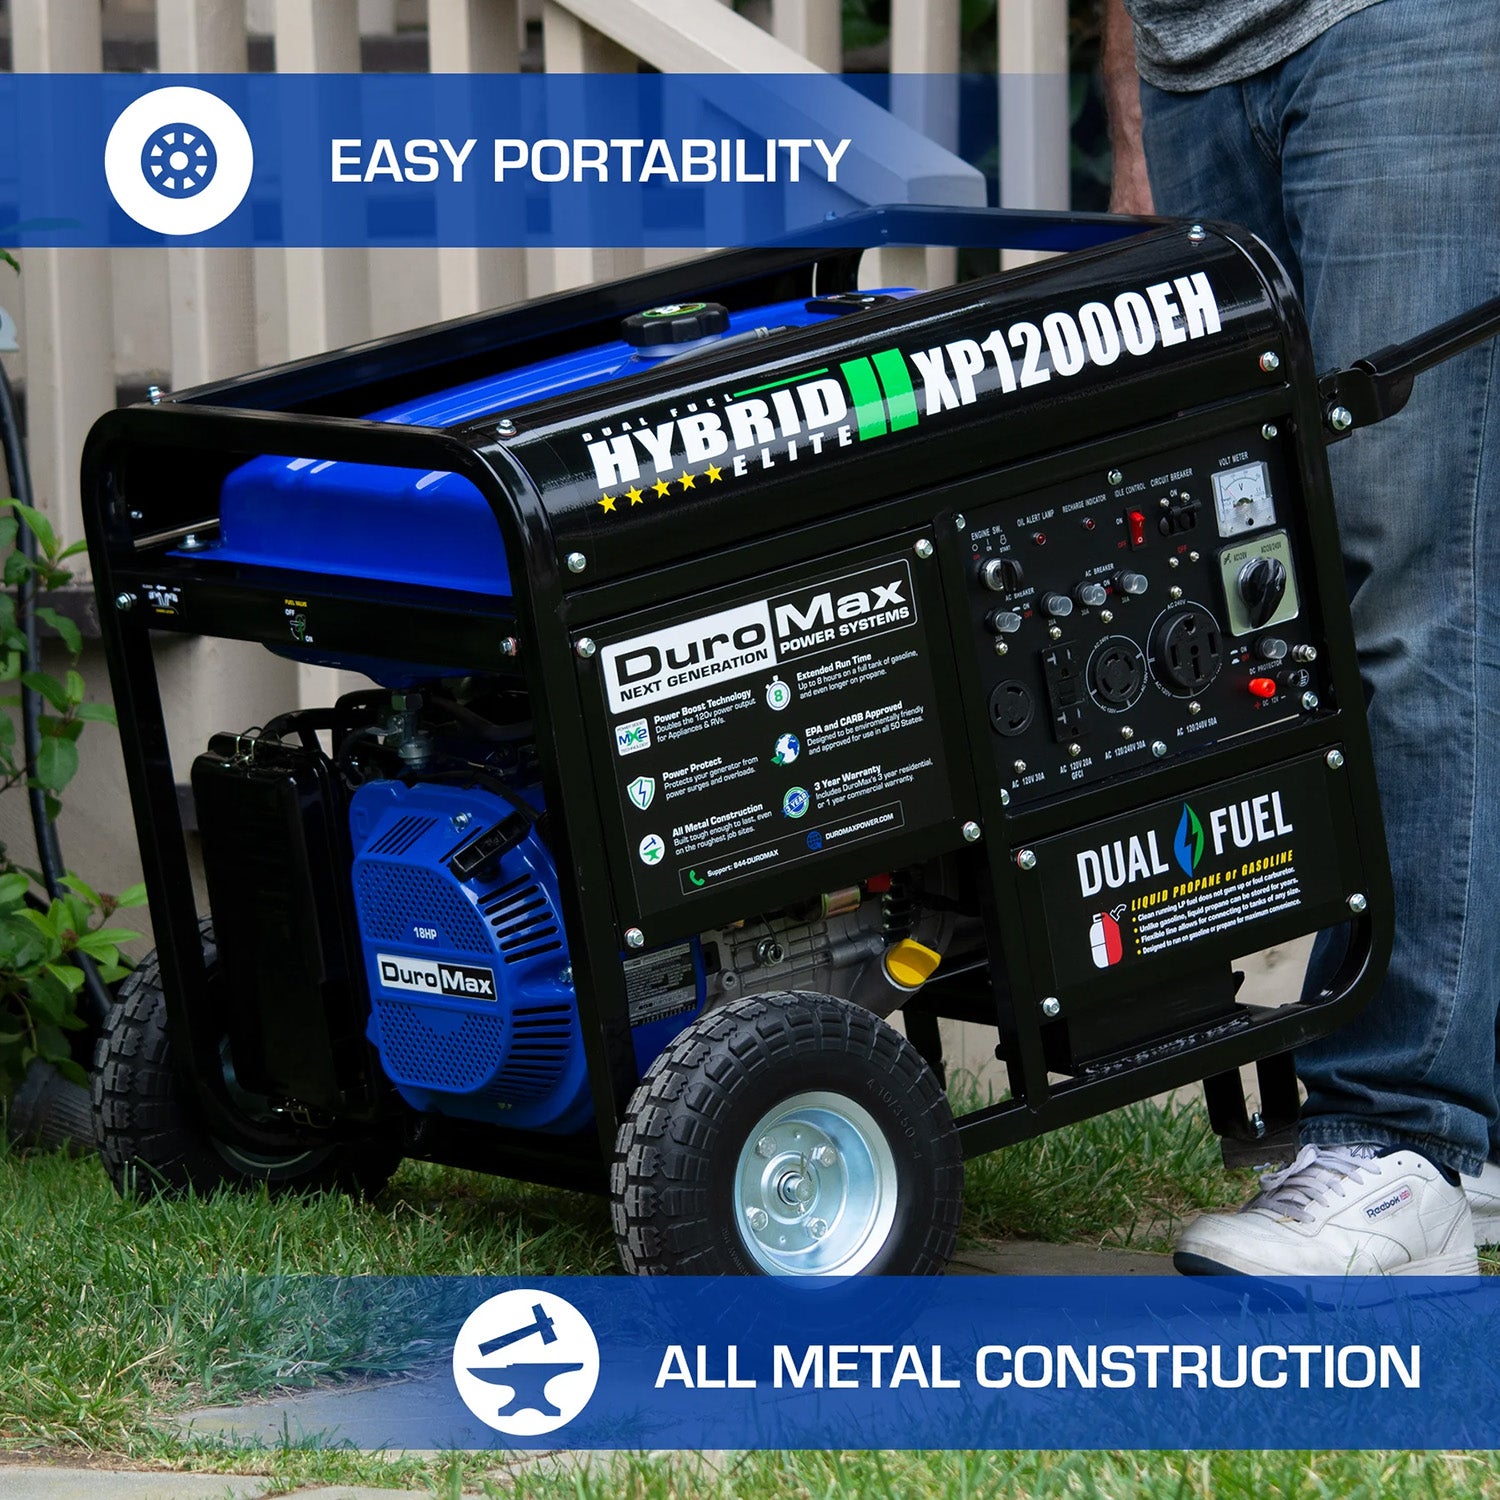 The DuroMax XP12000EH Generator Is Easily Portable And Has All-Metal Construction